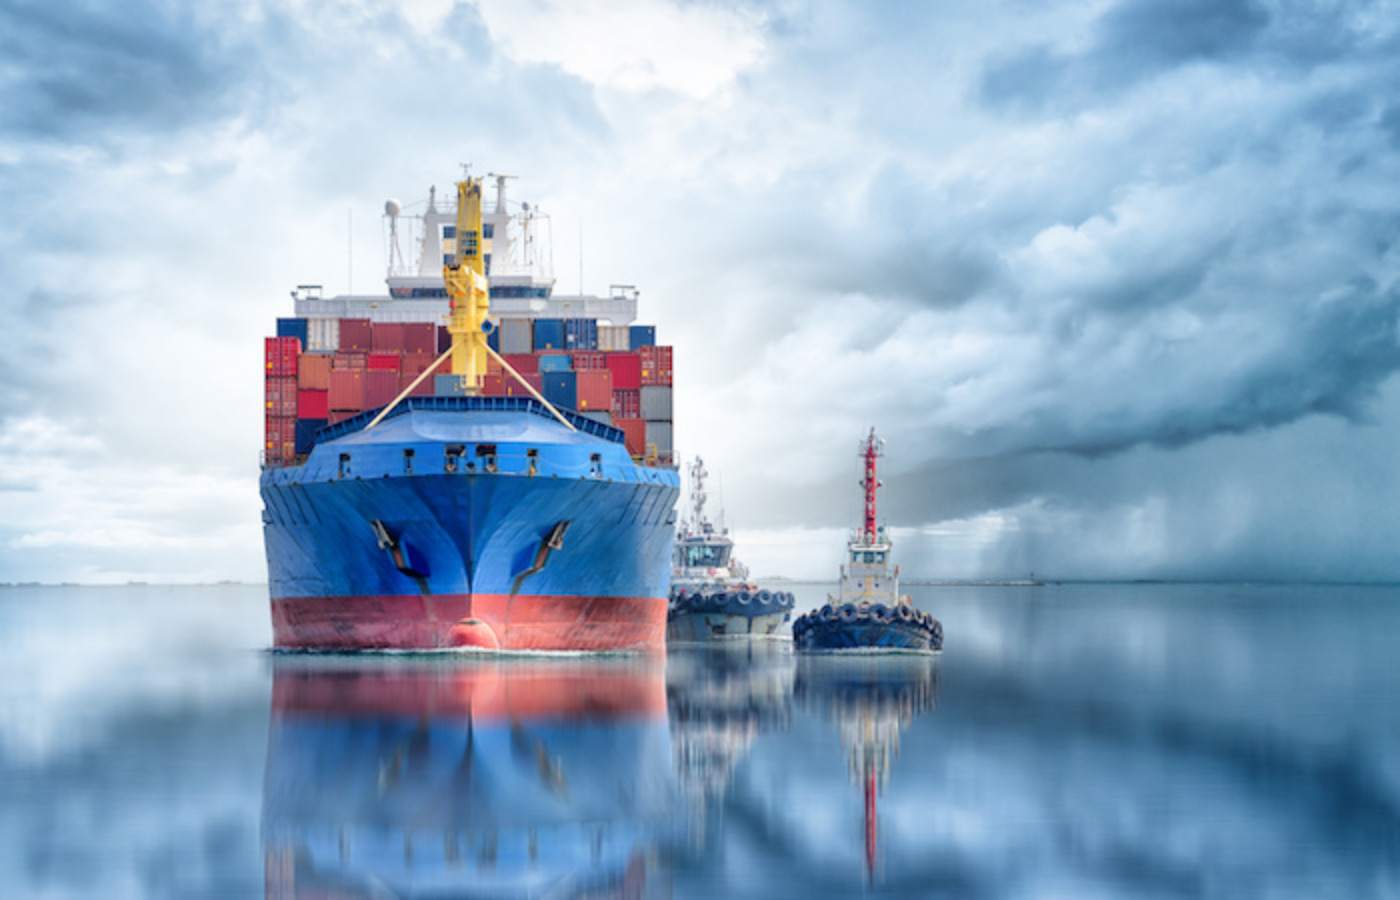 A colossal blue cargo ship, adorned with a vibrant yellow funnel, is anchored at